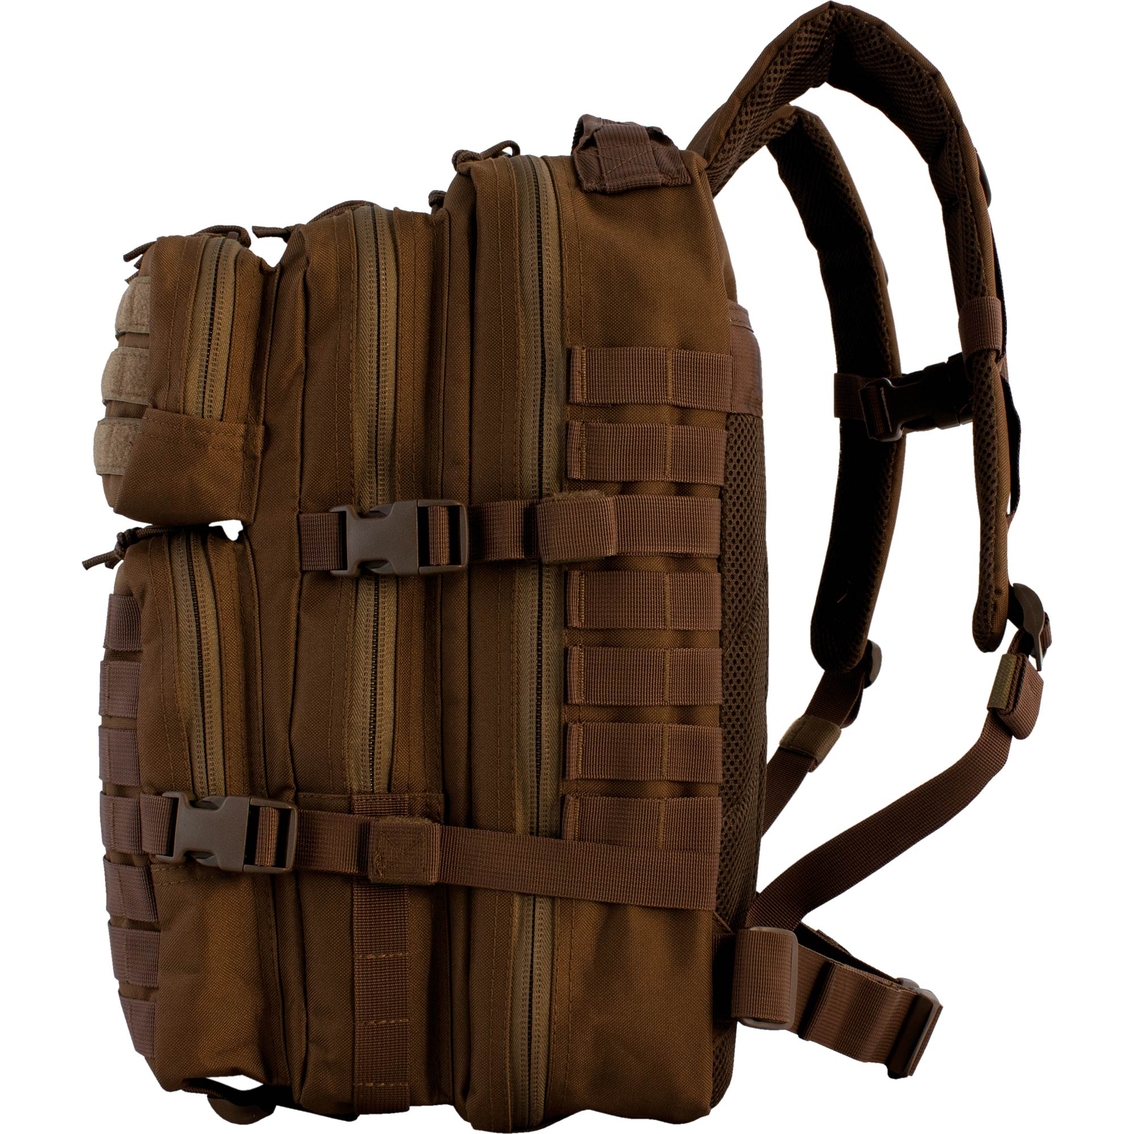 Red Rock Outdoor Gear Assault Pack - Image 7 of 7